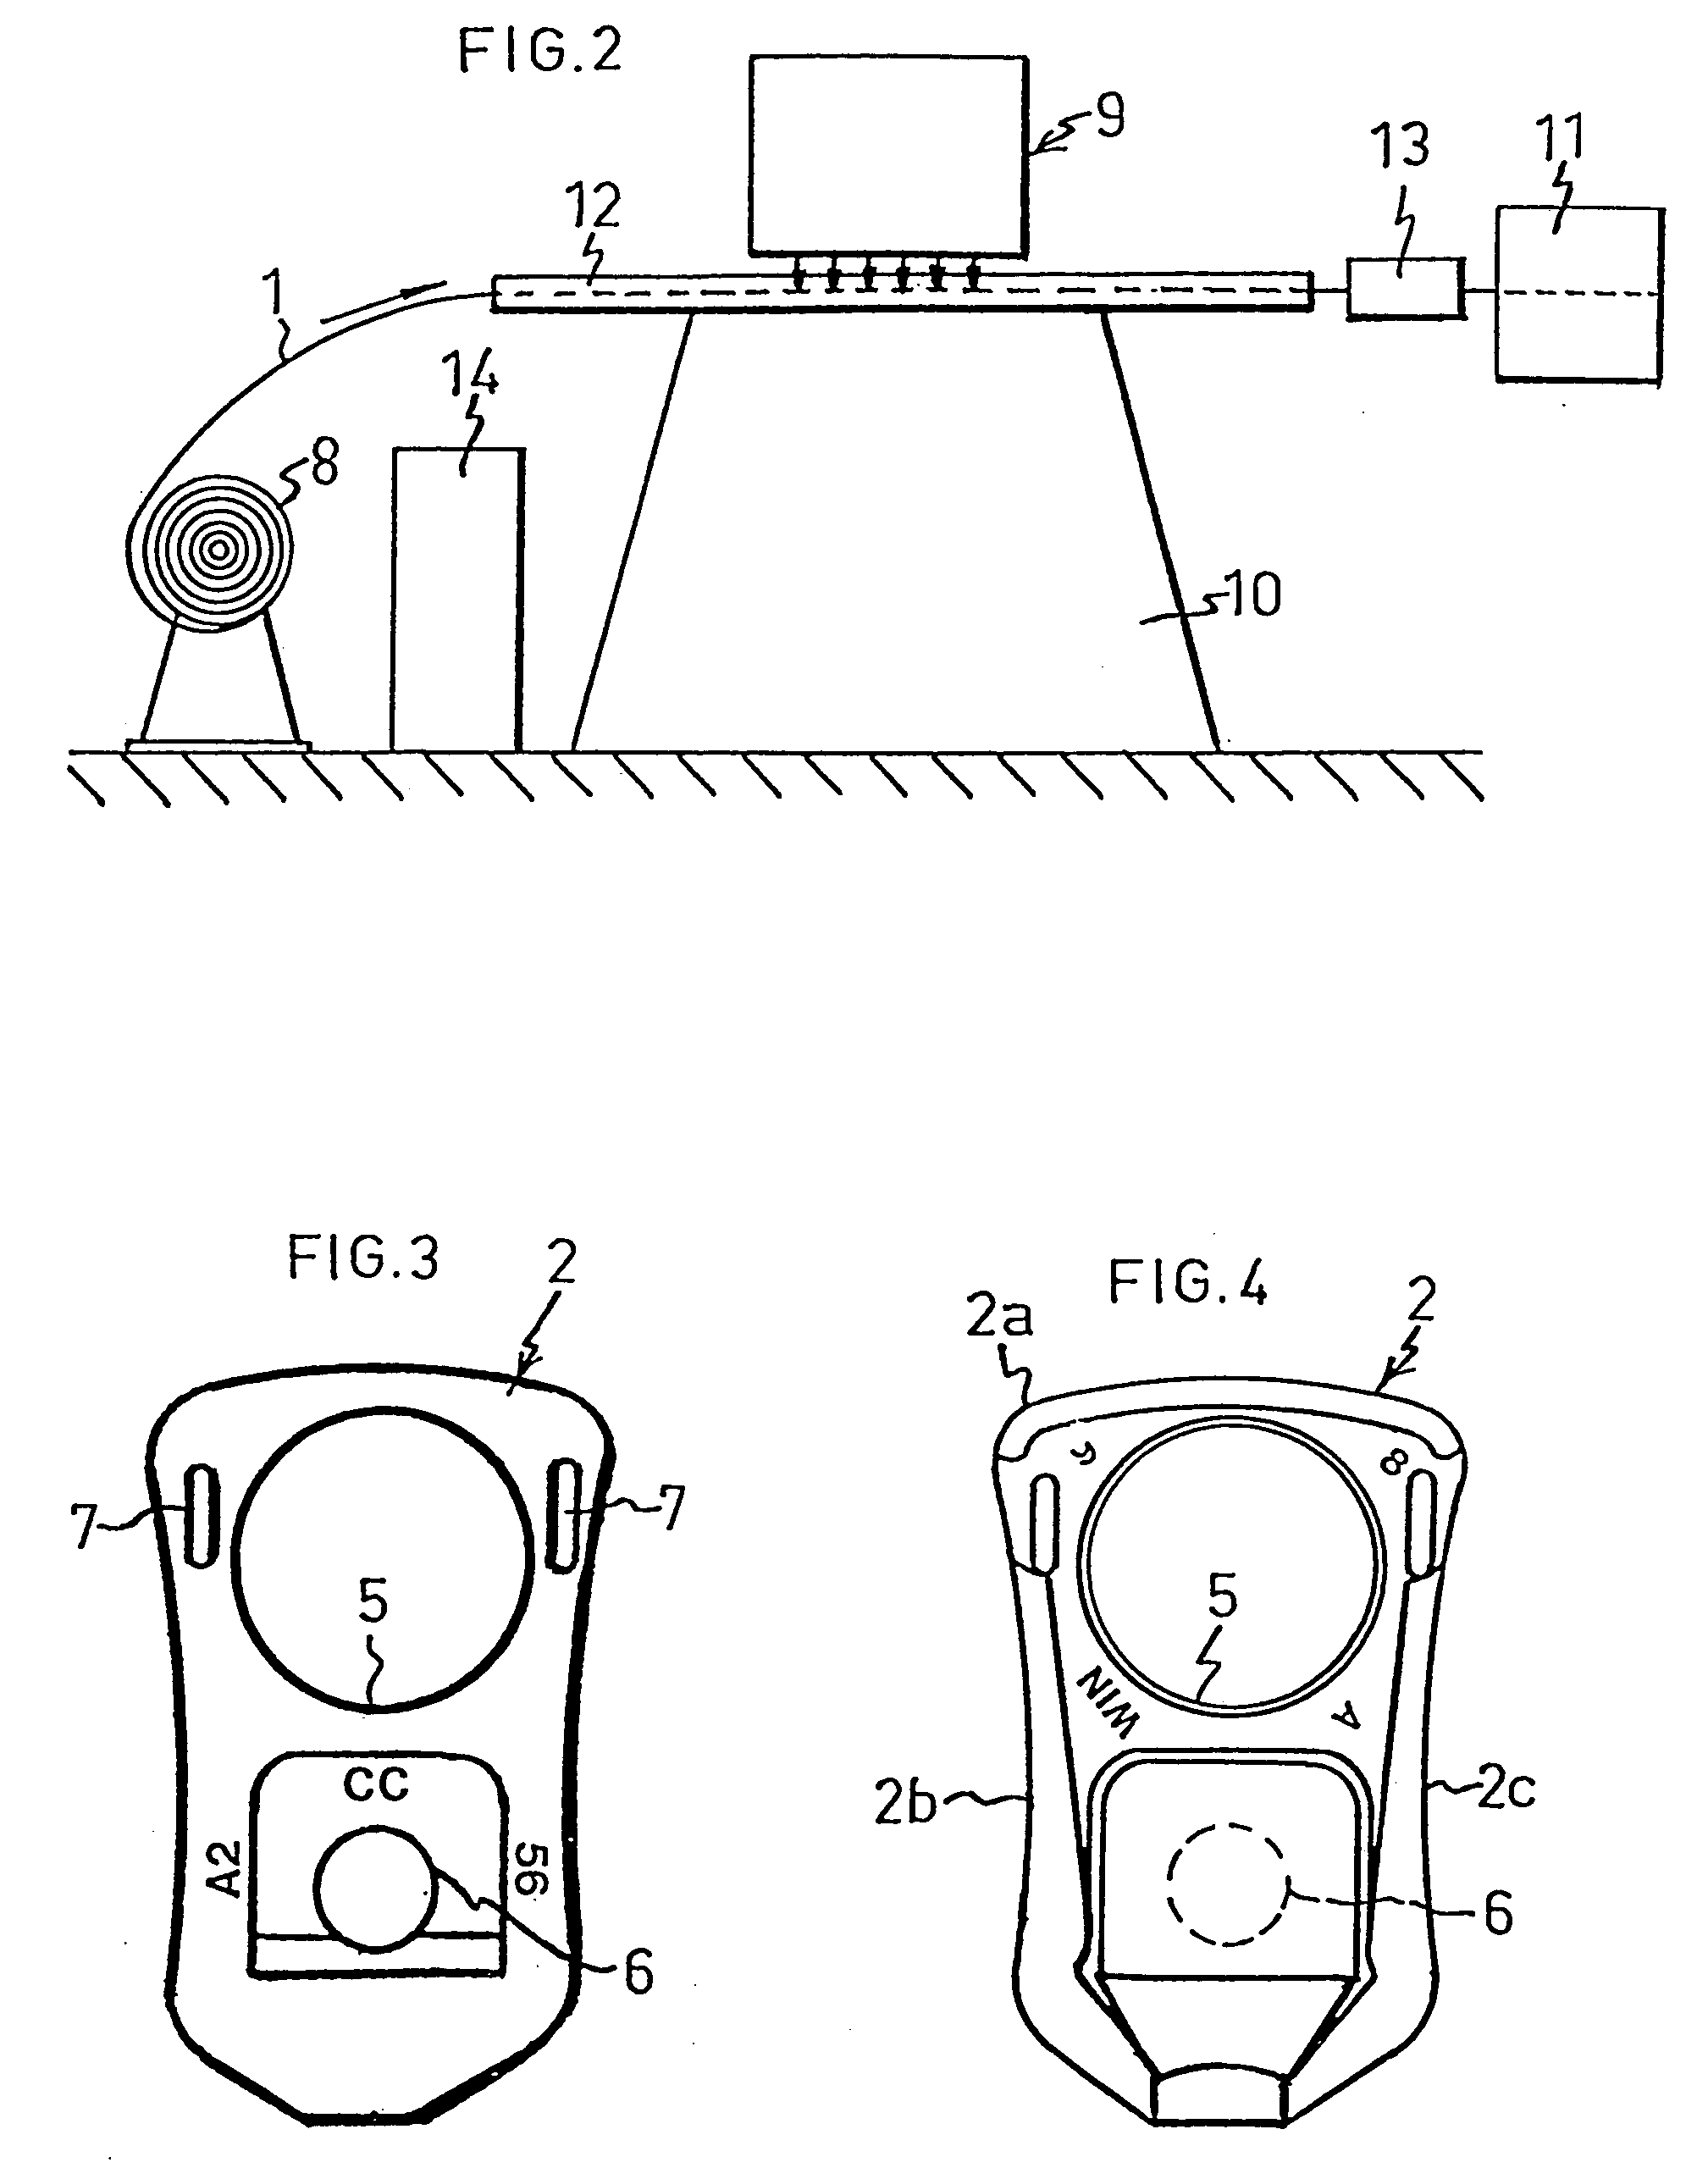 Method and apparatus for manufacturing marked articles to be included in cans